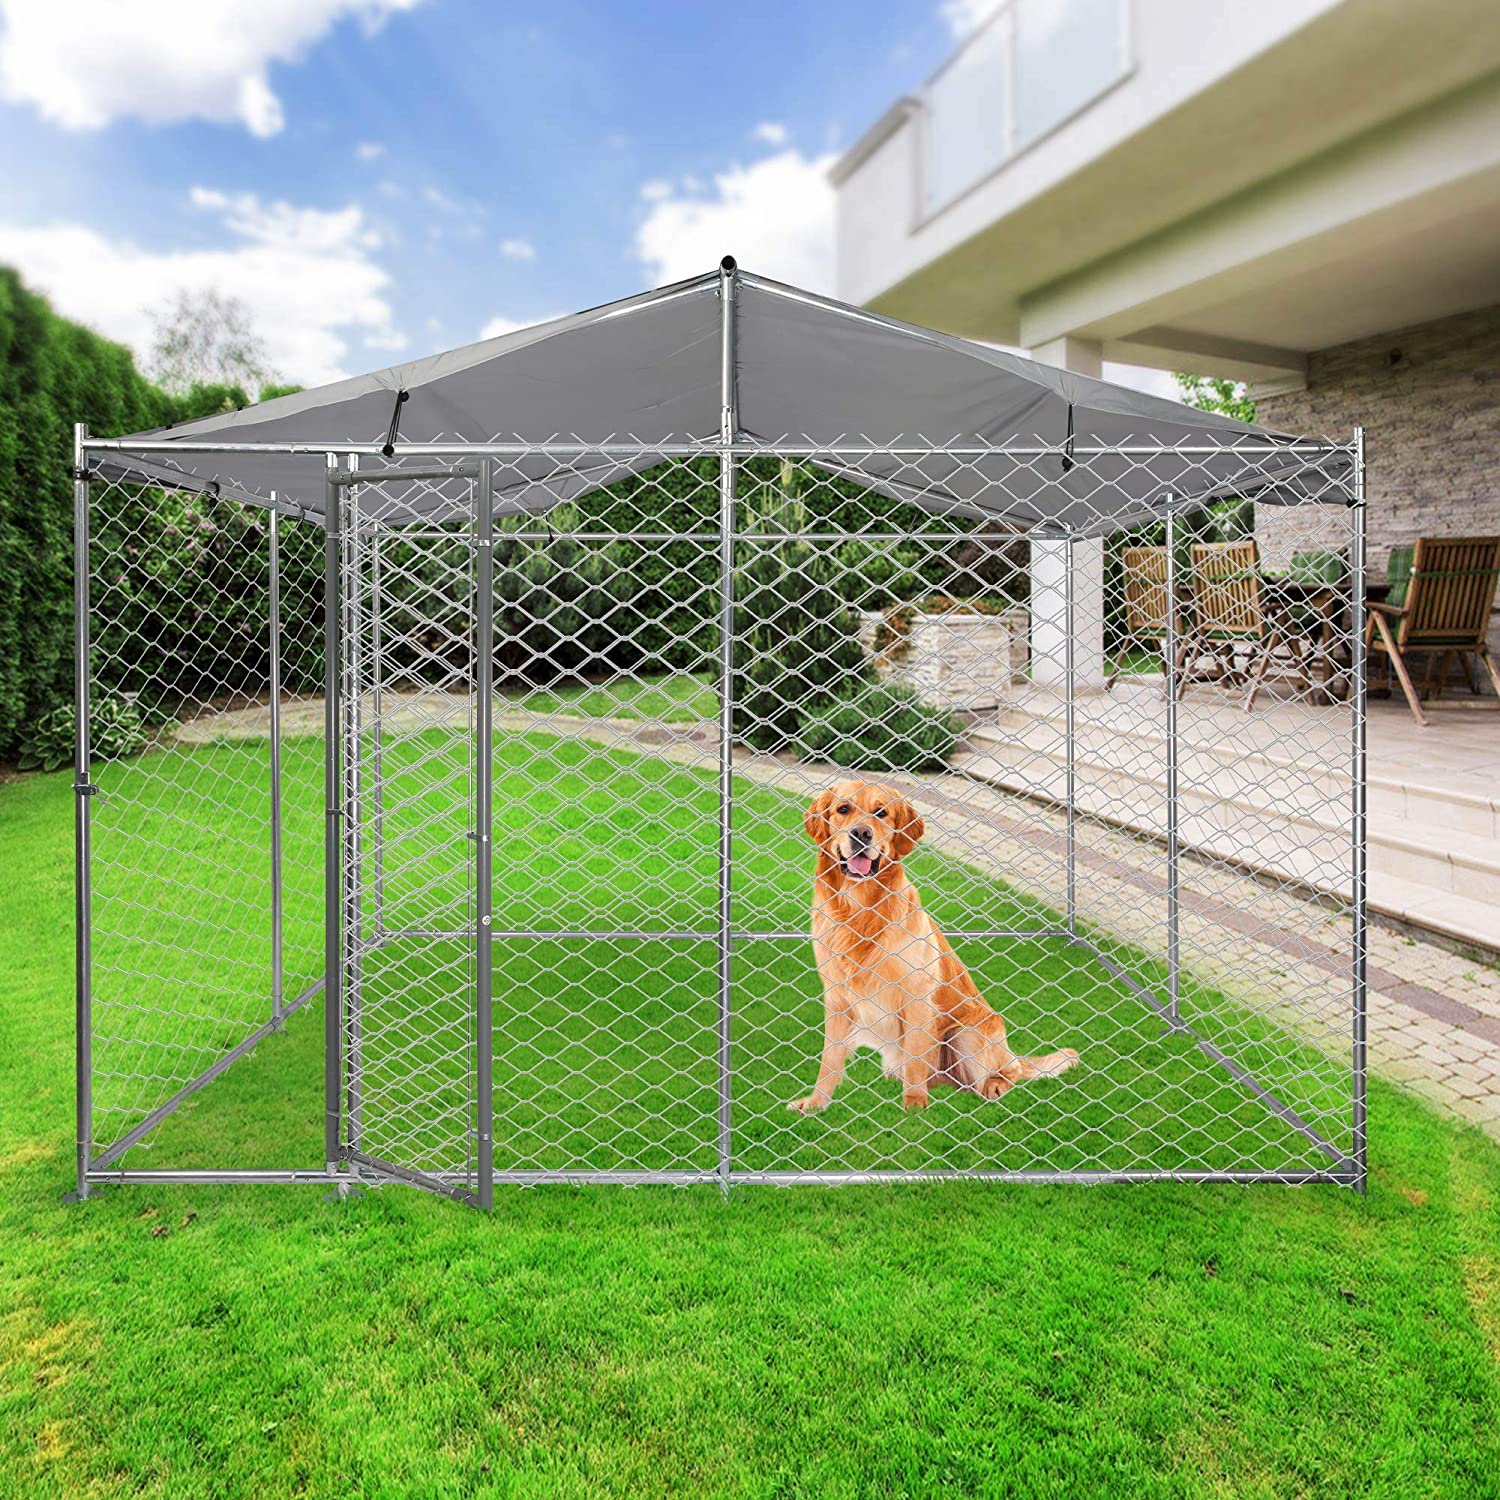 10' x 10' x 7.5' Outdoor Metal Dog Playpen For Your Puppy, Exercise Pens For Puppies, Chain Link Dog Kennel